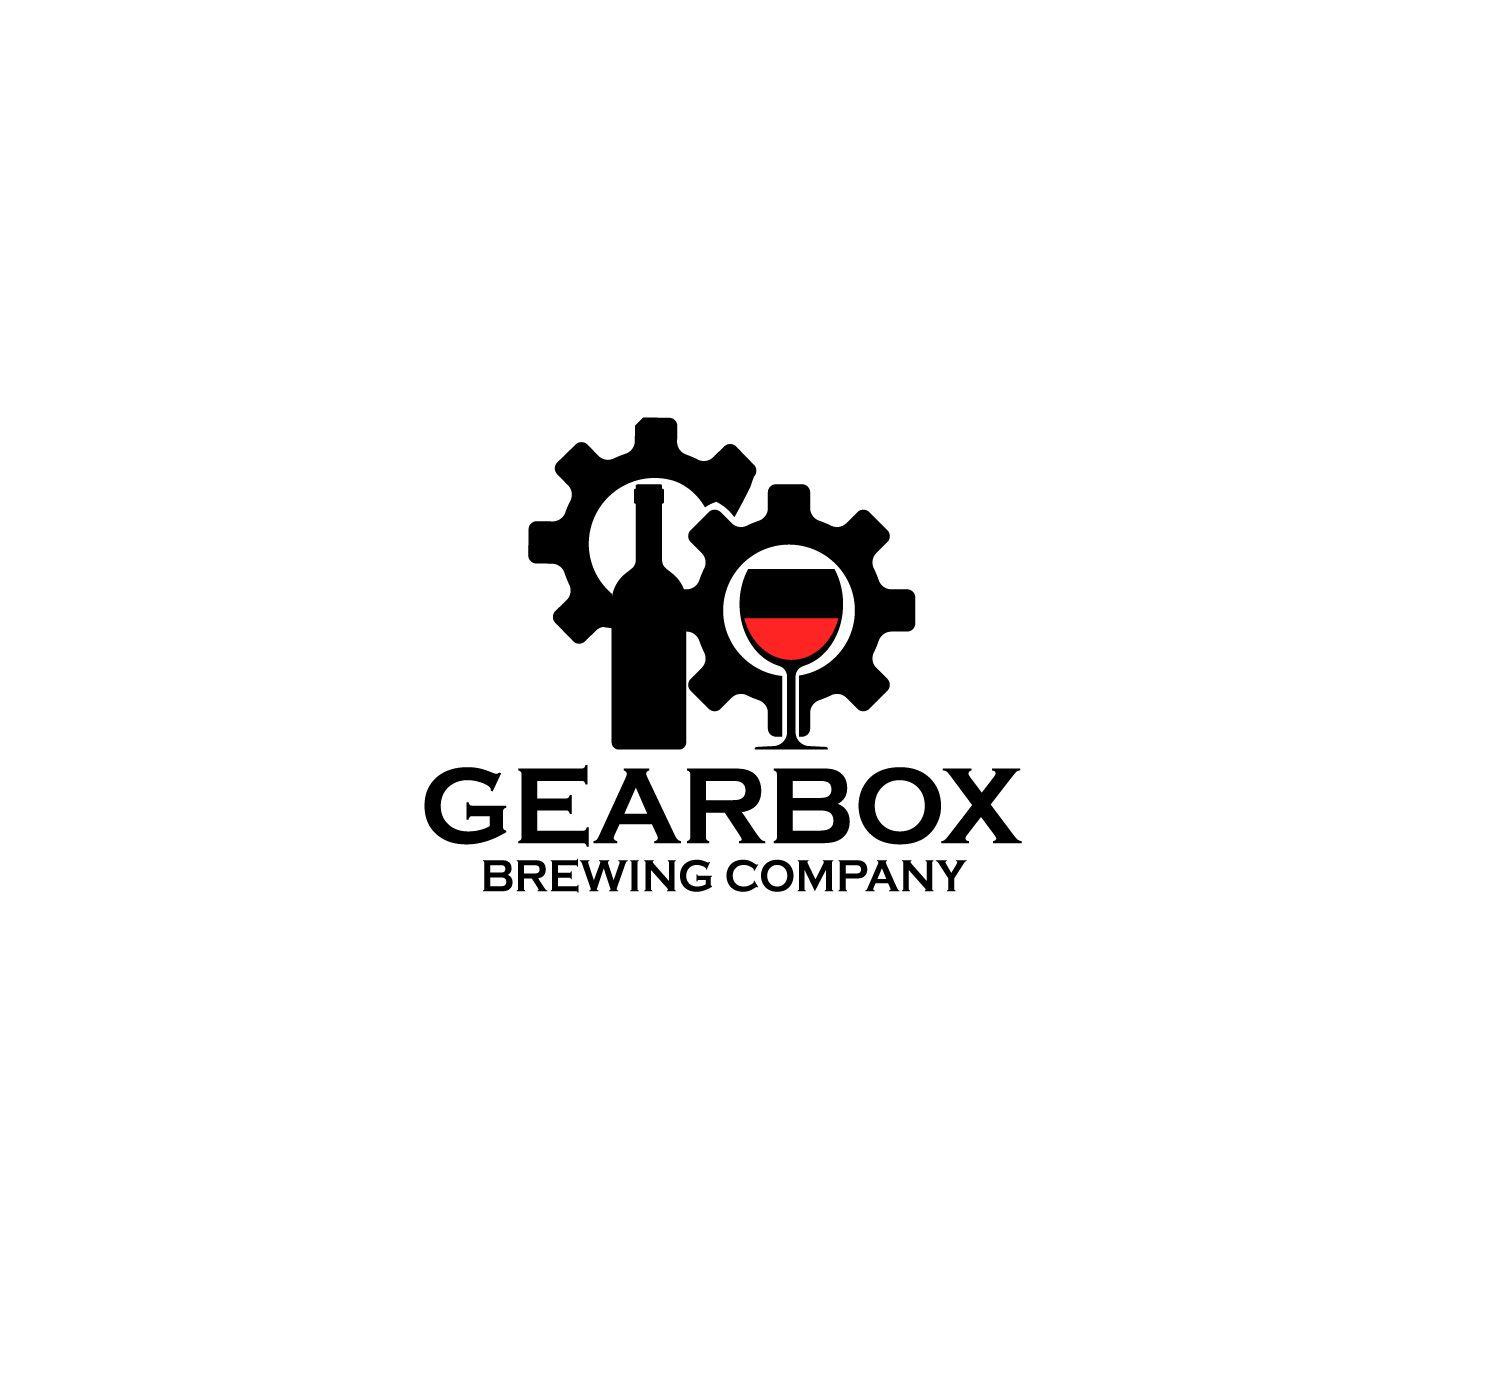 Gearbox Logo - Traditional, Elegant, Craft Brewery Logo Design for GEARBOX BREWING ...